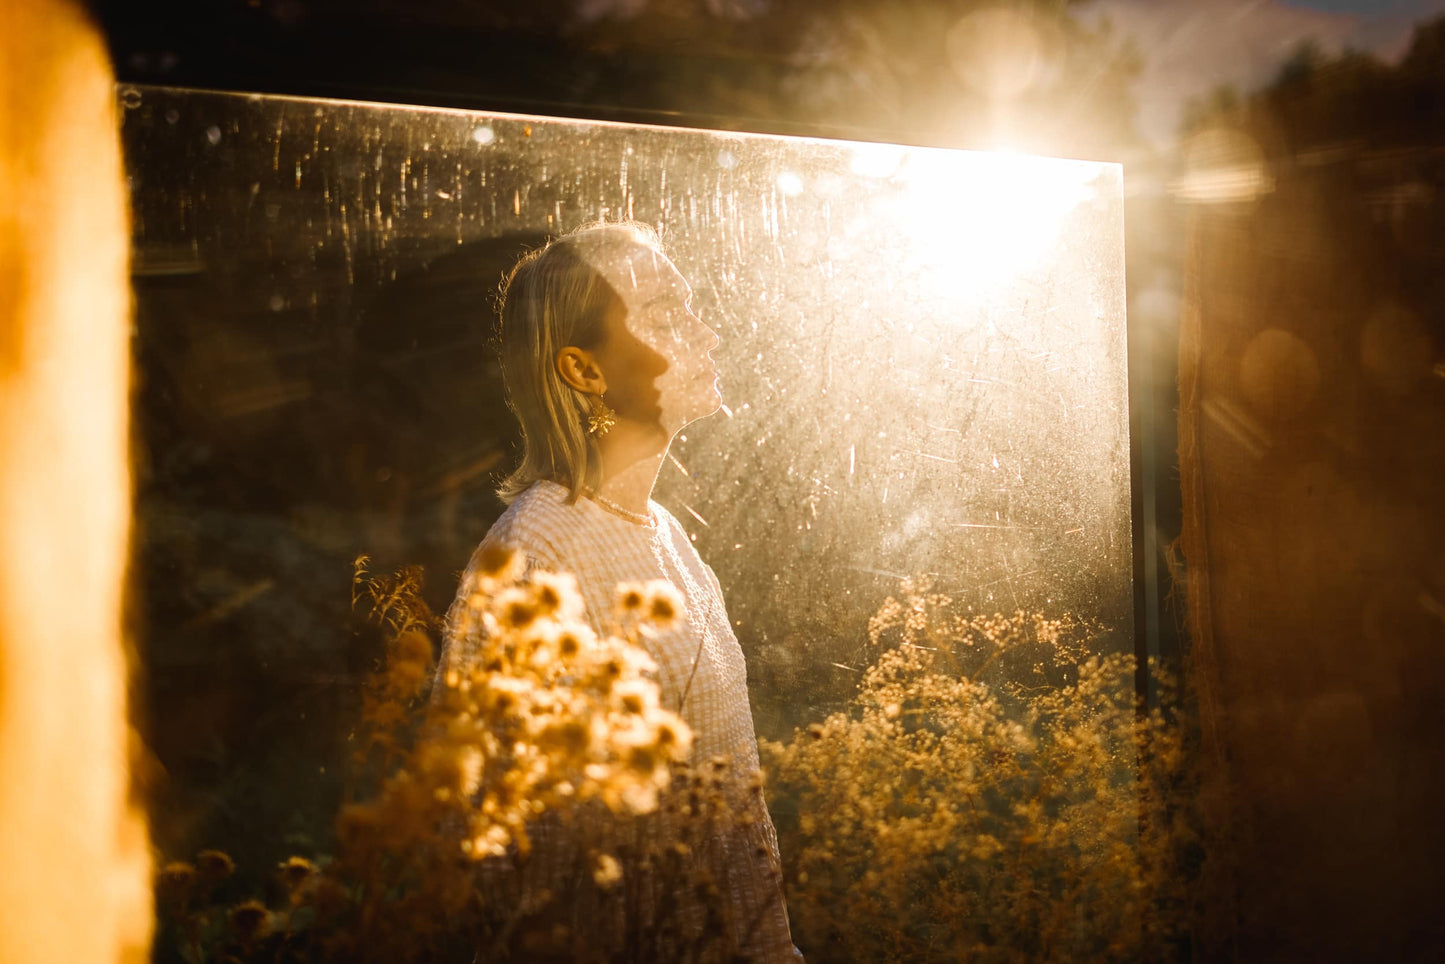 Profile of a person bathed in golden sunlight, representing hope and enjoyment of life, from Celin May's Sun Collection.